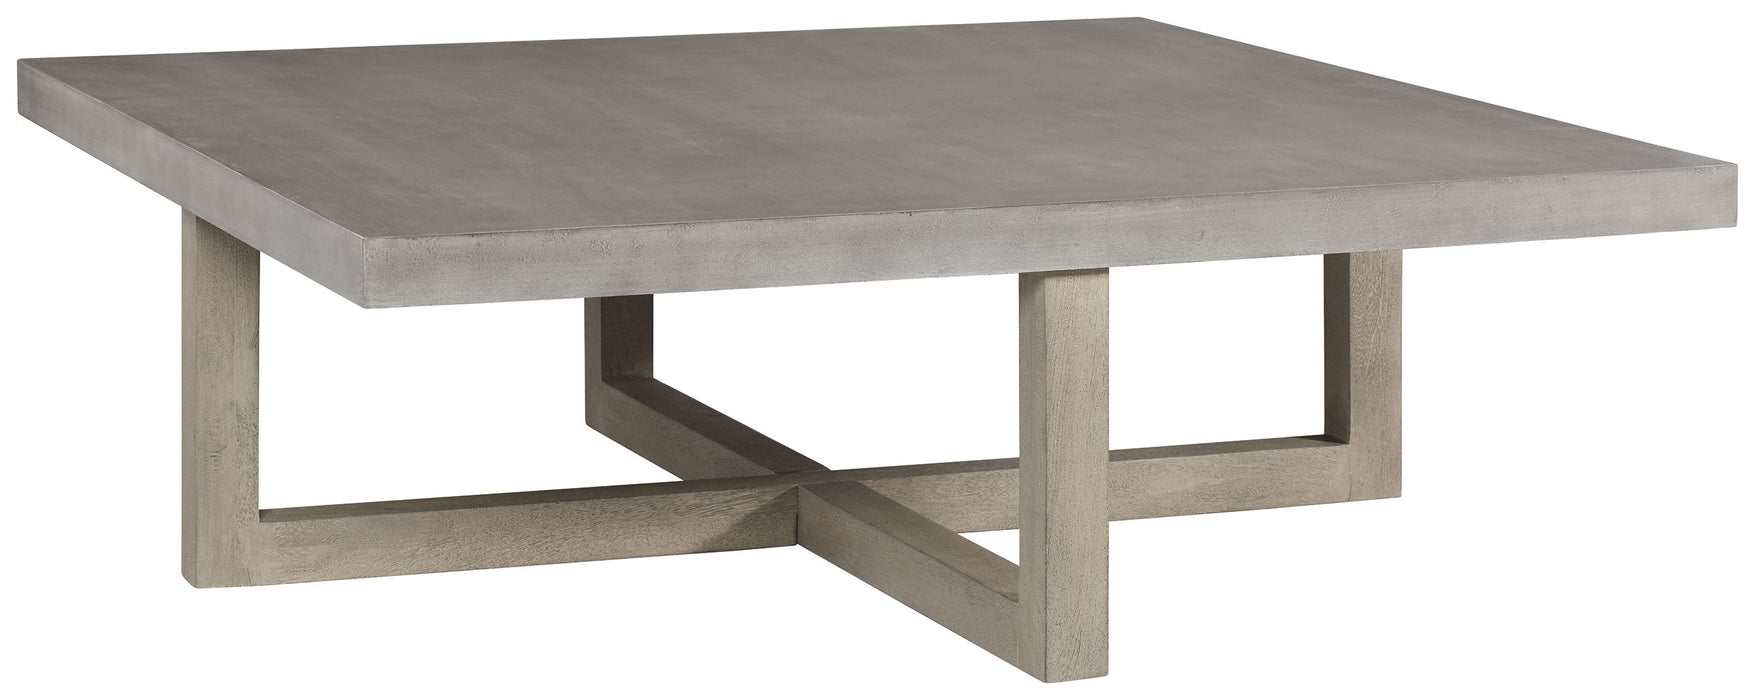 Lockthorne - Gray - Square Cocktail Table Capital Discount Furniture Home Furniture, Home Decor, Furniture